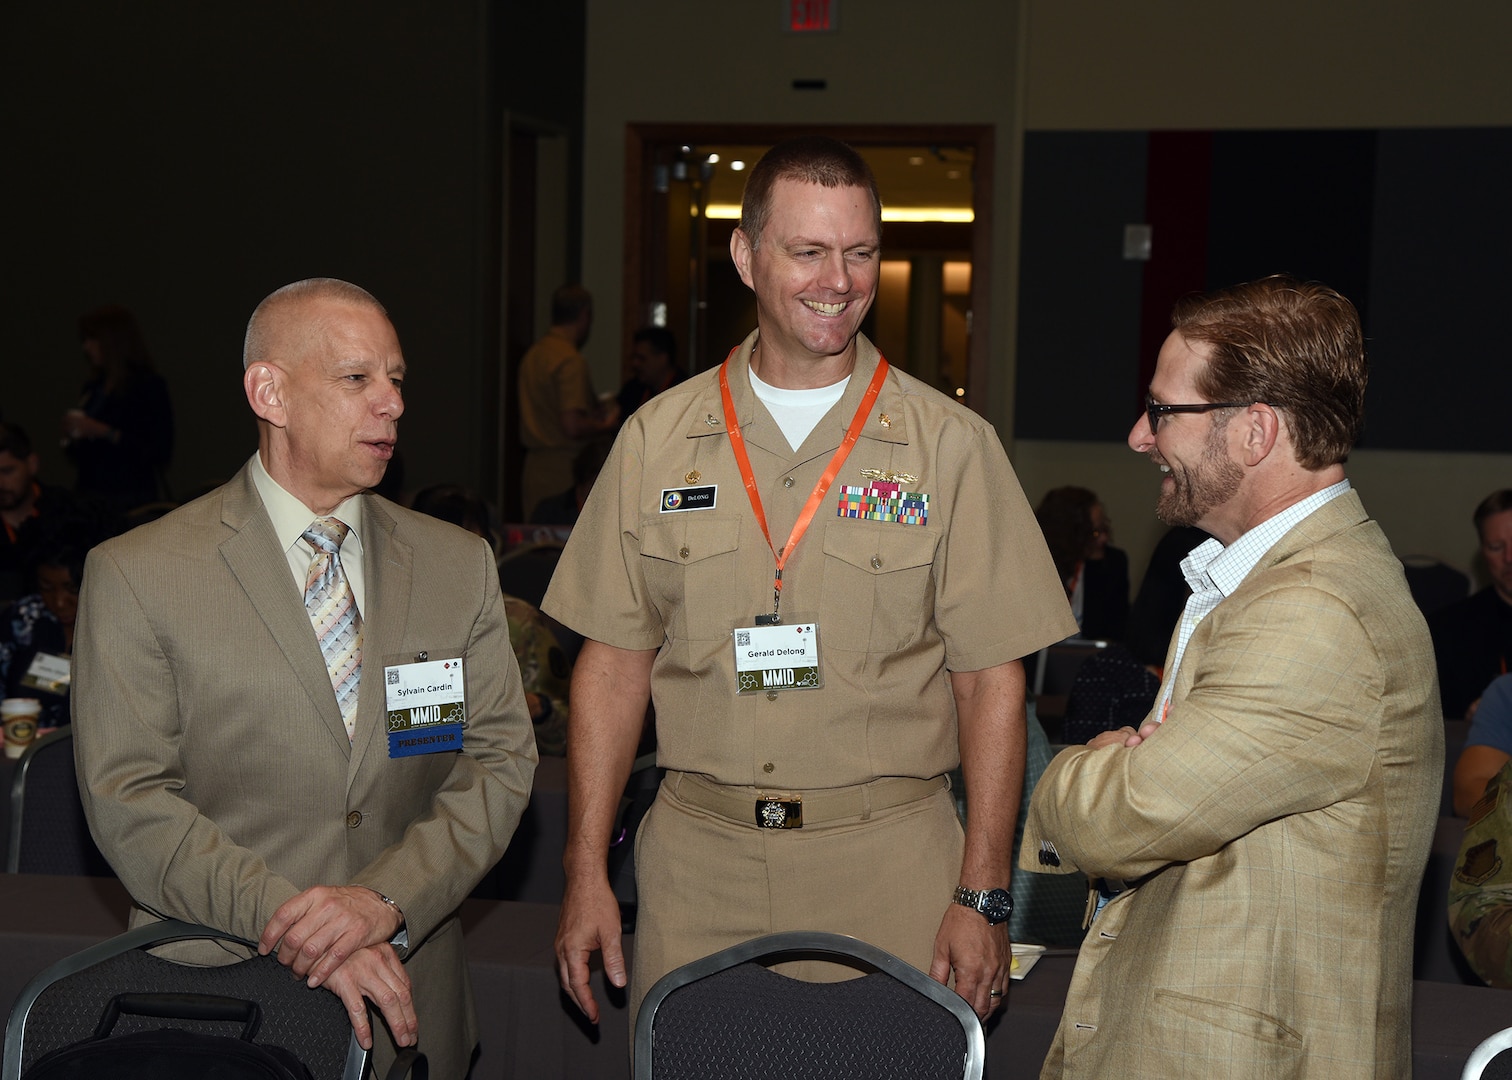 SAN ANTONIO - (May 2, 2023) – Commanding Officer Capt. Gerald DeLong, of Naval Medical Research Unit (NAMRU) San Antonio, joined by Chief Science Director Dr. Sylvain Cardin (left), speaks with an attendee during the 4th Military Medical Industry Day (MMID) hosted by VelocityTX, a subsidiary of Texas Research & Technology Foundation, the City of San Antonio, and Bexar County at the Henry B. Gonzalez Convention Center.  Attendees heard welcoming remarks from Mayor Ron Nirenberg, keynote address by Dr. Sean Biggerstaff, acting deputy assistant director, Research and Engineering, Defense Health Agency (DHA) along with various panels, to include but not limited to, “What the Military Wants” and “Military Medical Research and Development (R&D) Funding.” The MMID provides a platform for innovators and entrepreneurs to learn about military medical requirements, available funding sources to support R&D, and ways to work with the military. NAMRU San Antonio’s mission is to conduct gap driven combat casualty care, craniofacial, and directed energy research to improve survival, operational readiness, and safety of Department of Defense (DoD) personnel engaged in routine and expeditionary operations. It is one of the leading research and development laboratories for the U.S. Navy under the DoD and is one of eight subordinate research commands in the global network of laboratories operating under Naval Medical Research Command (NMRC) in Silver Spring, Md. (U.S. Navy photo by Burrell Parmer, NAMRU San Antonio Public Affairs/Released)